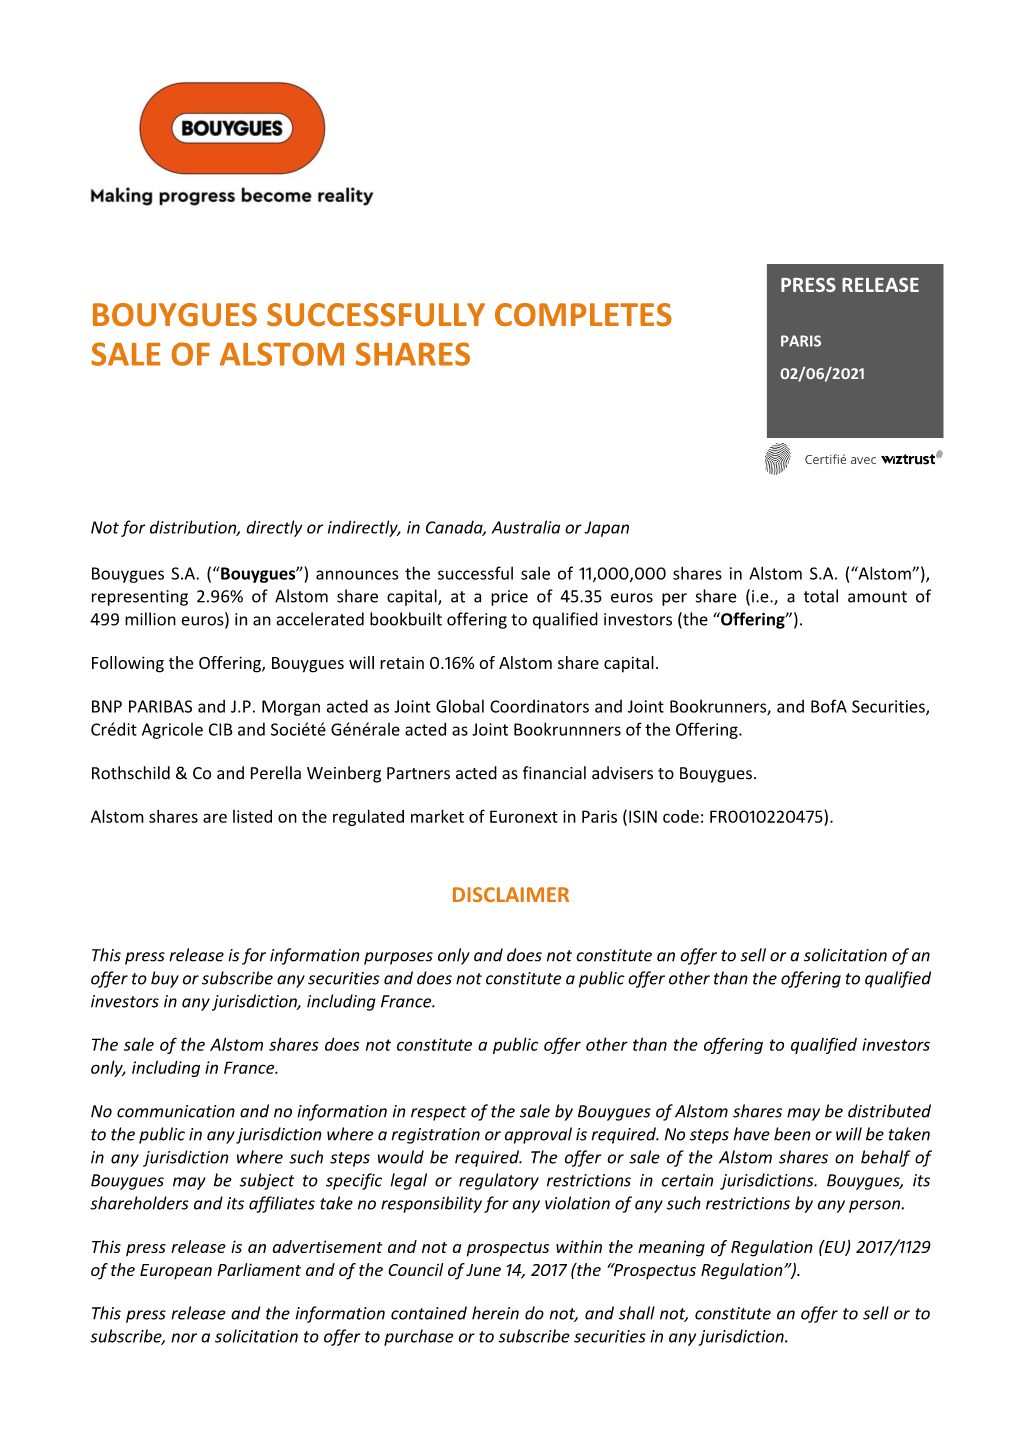 PR Successful Sale of Alstom Shares by Bouygues